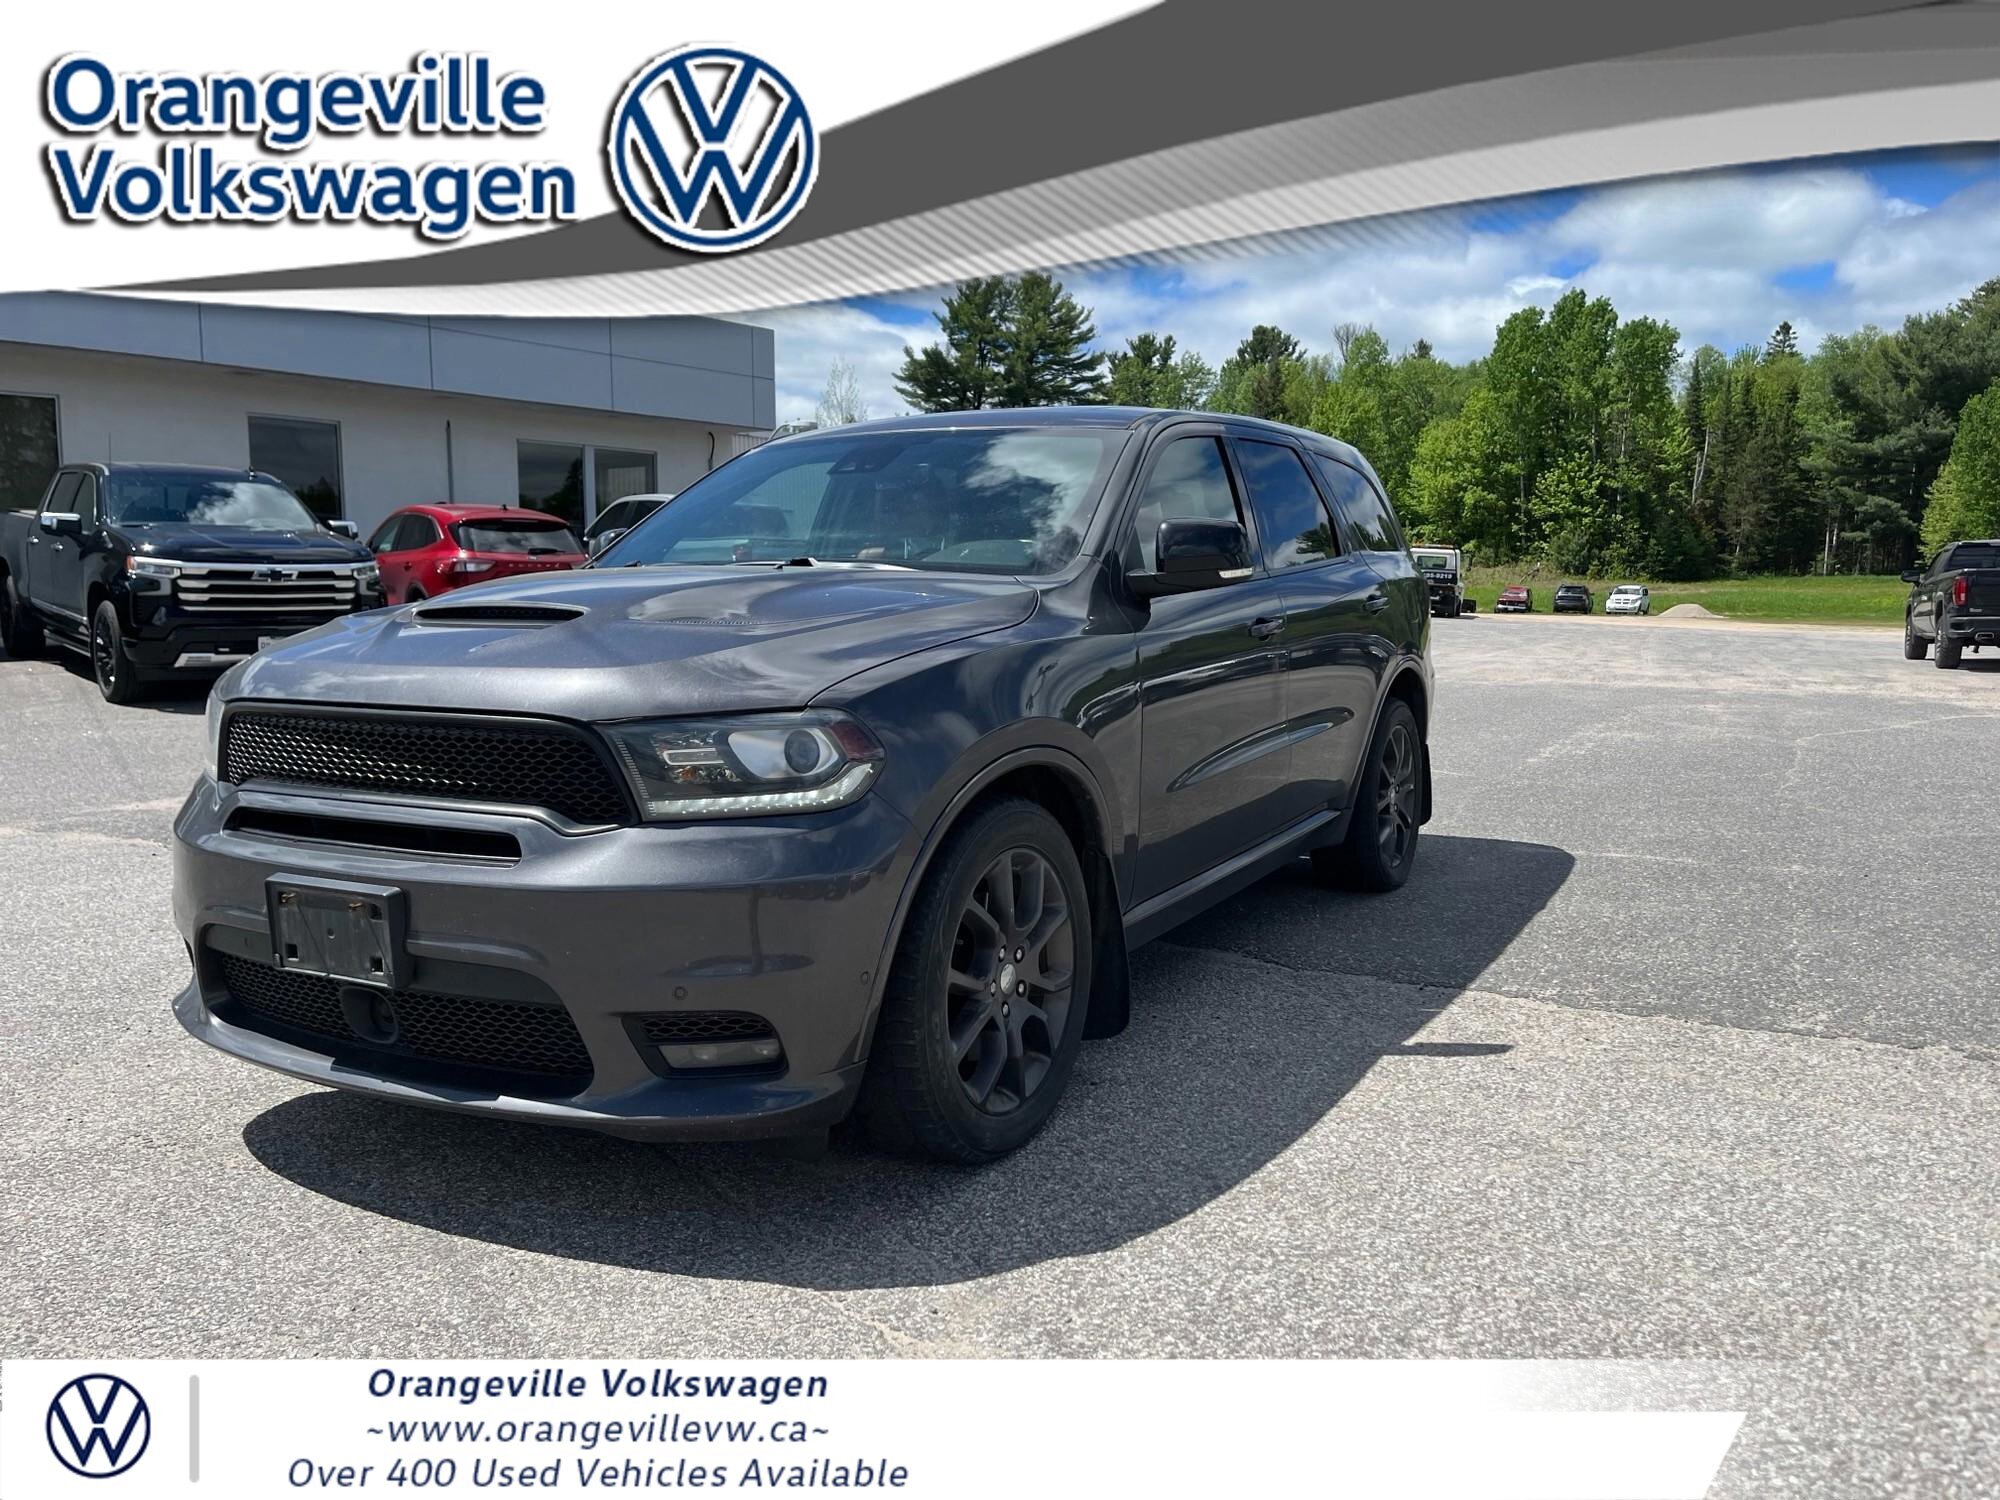 2018 Dodge Durango R/T CERTIFIED PRE-OWNED WITH A CLEAN CARFAX!